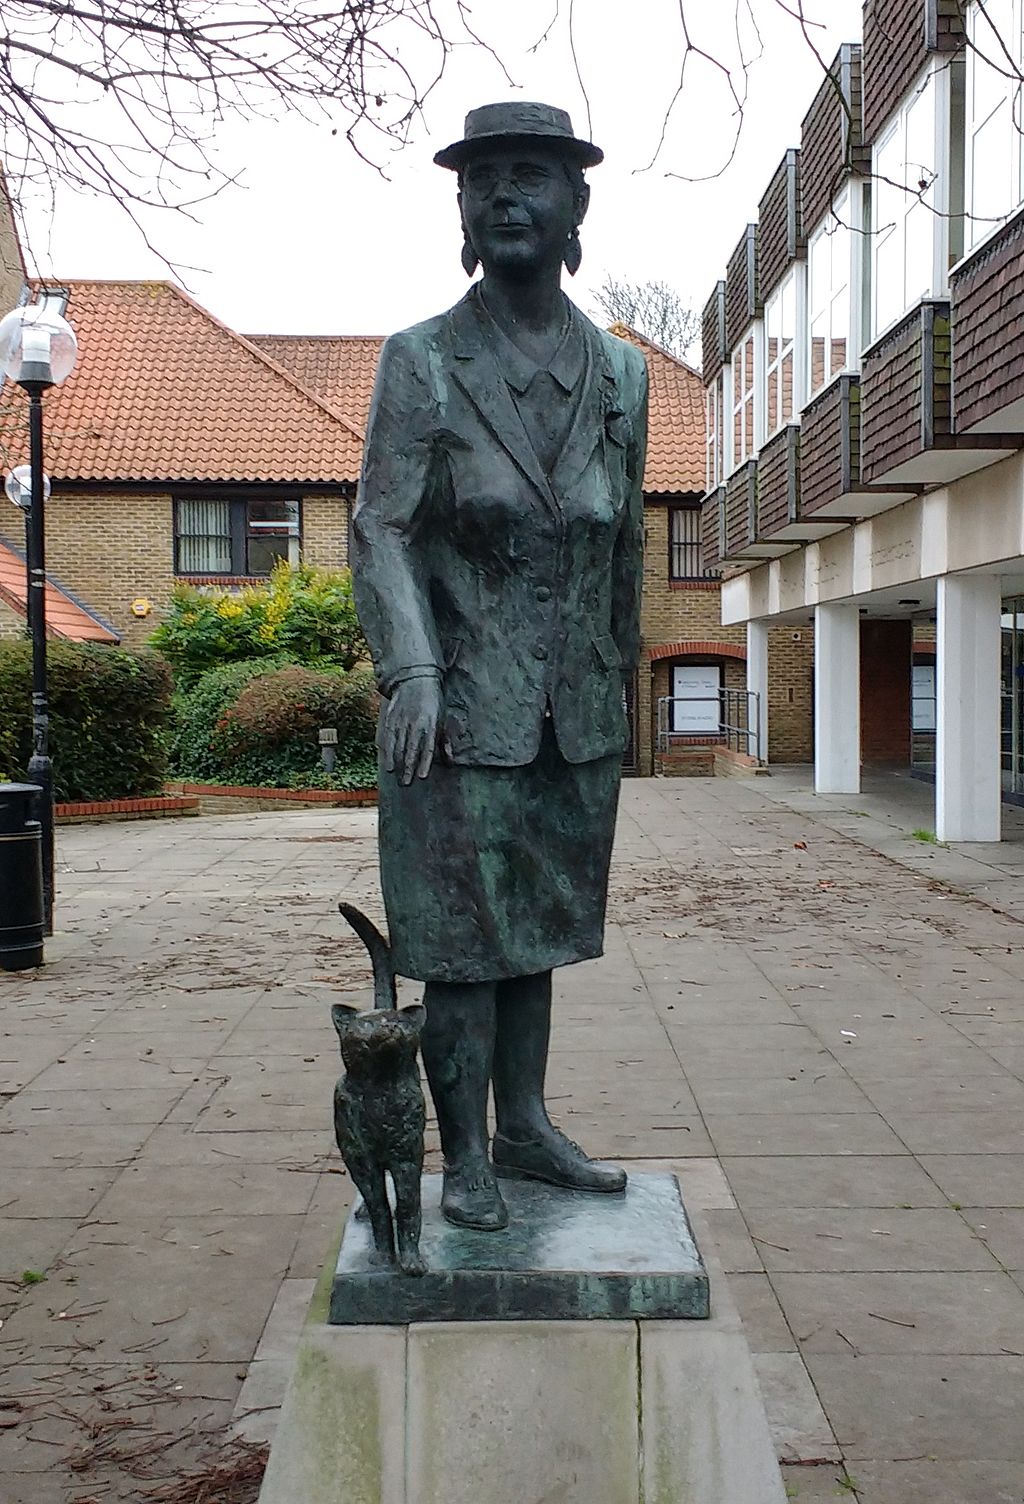 Bronze statue of Dorothy L. Sayers, by John Doubleday. Located on Newland Street, Witham, England. (Photo by GeneralJohnsonJameson (Own work) [CC0], via Wikimedia Commons)